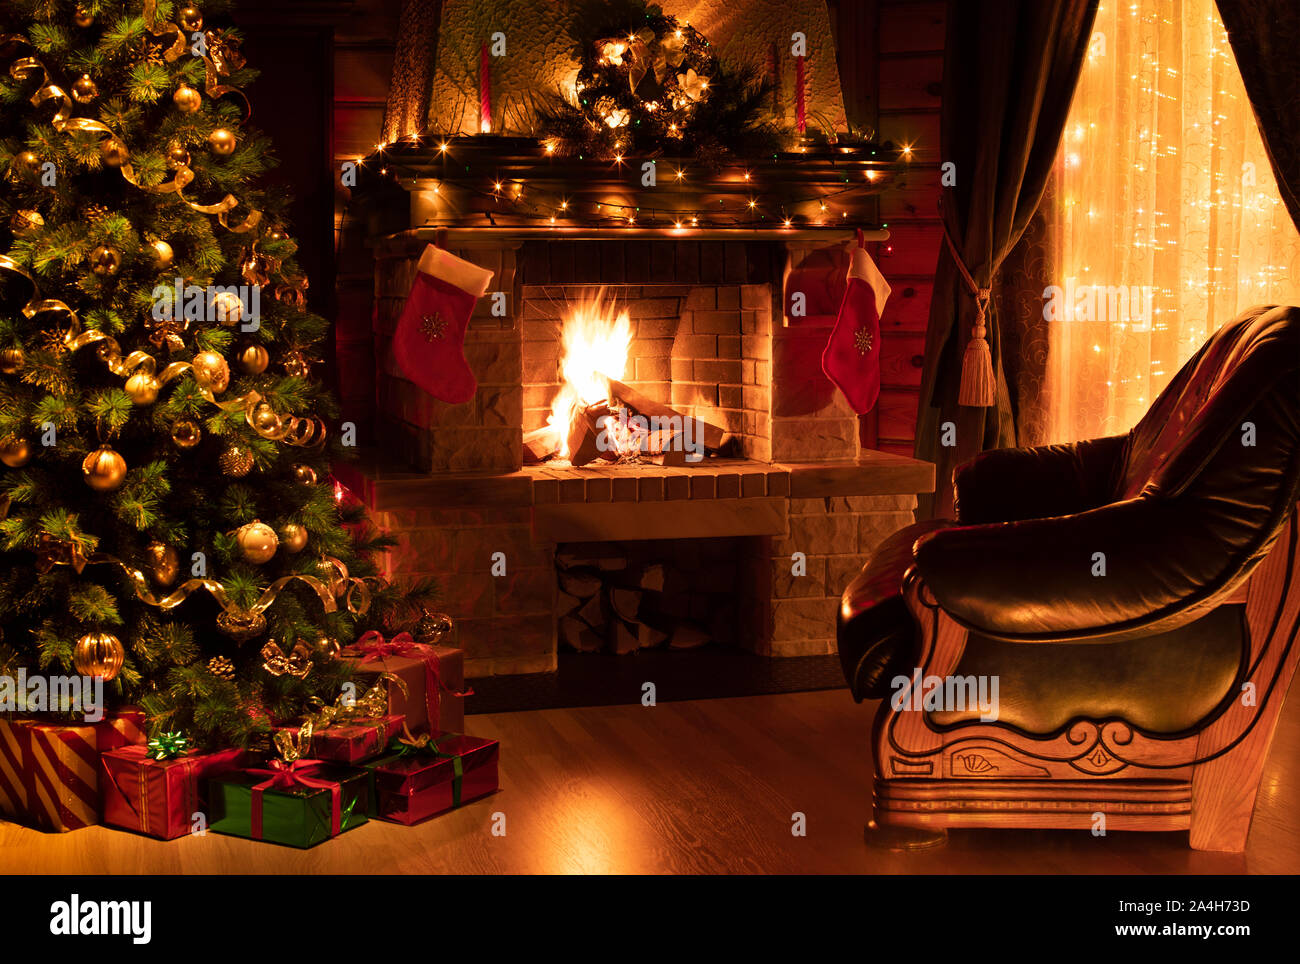 Christmas decorated living room interior with fireplace, armchair, window and tree Stock Photo